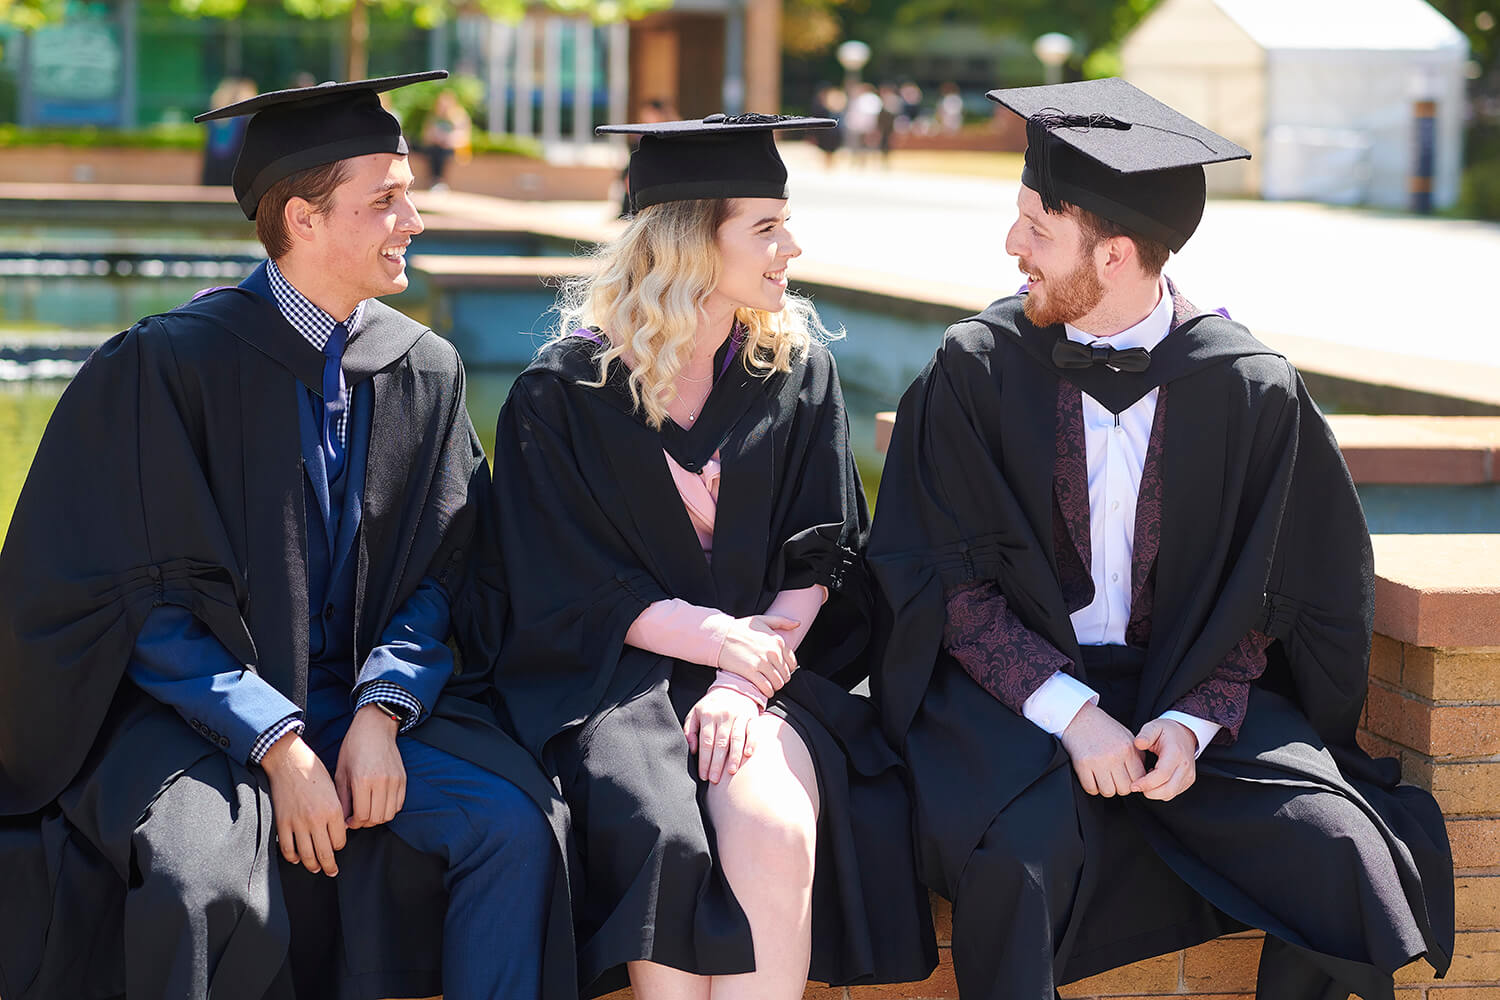 Three graduands sit in the piazza area on the western side of campus while wearing their graduation robes and mortar boards.